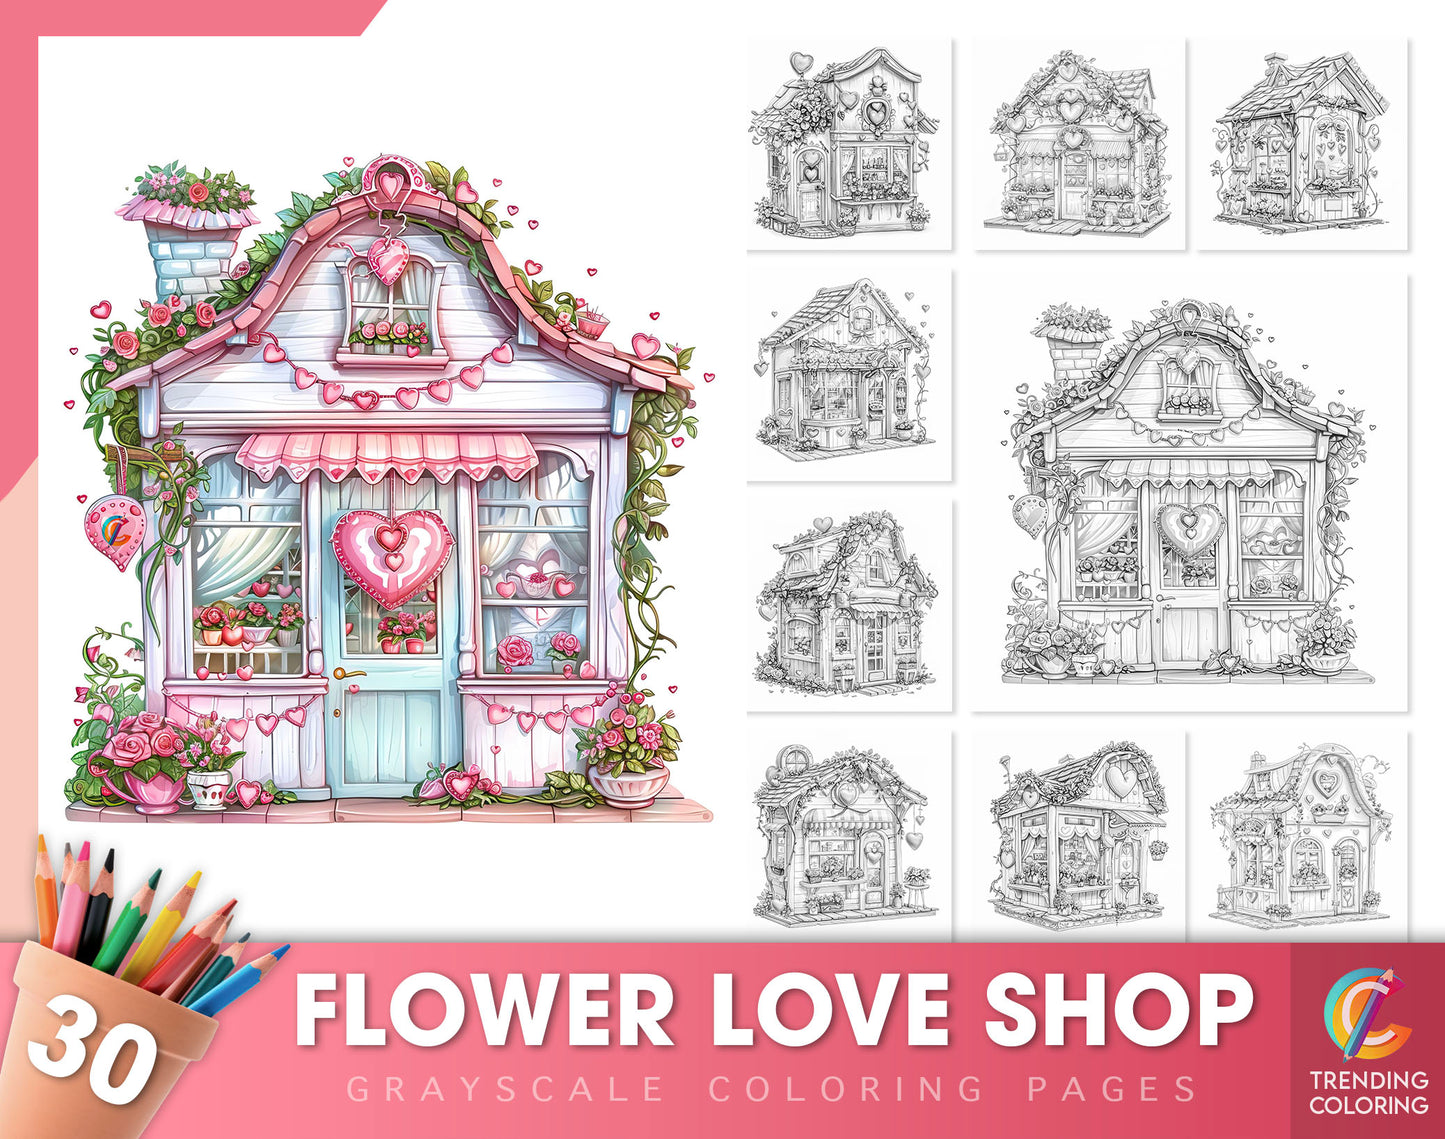 30 Flower Love Shop Grayscale Coloring Pages - Instant Download - Printable Dark/Light